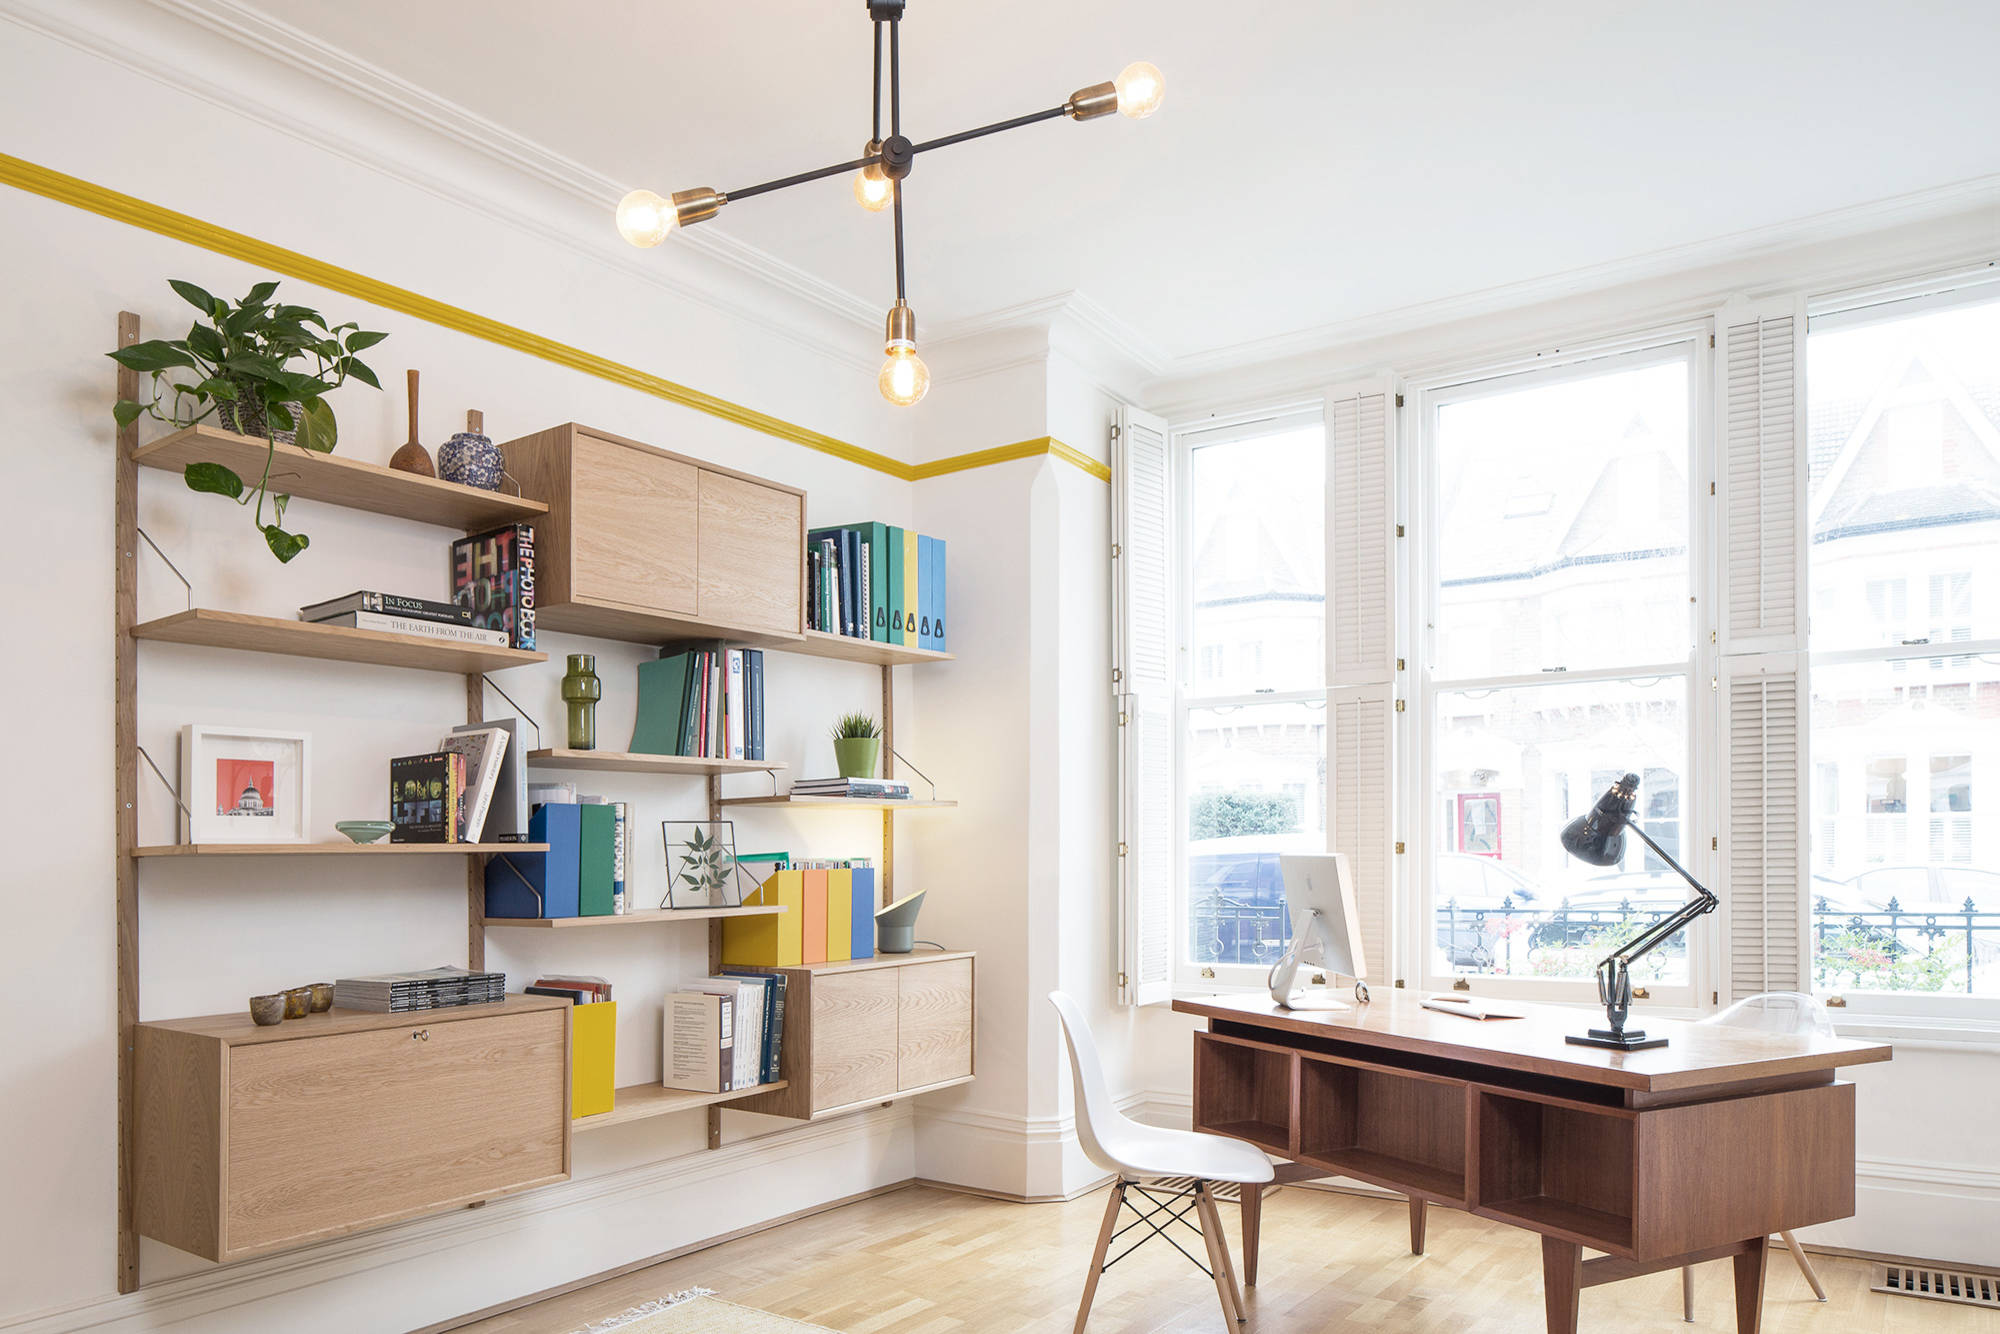 Home Office Storage Ideas: 10 Ways To Store In A Home Study